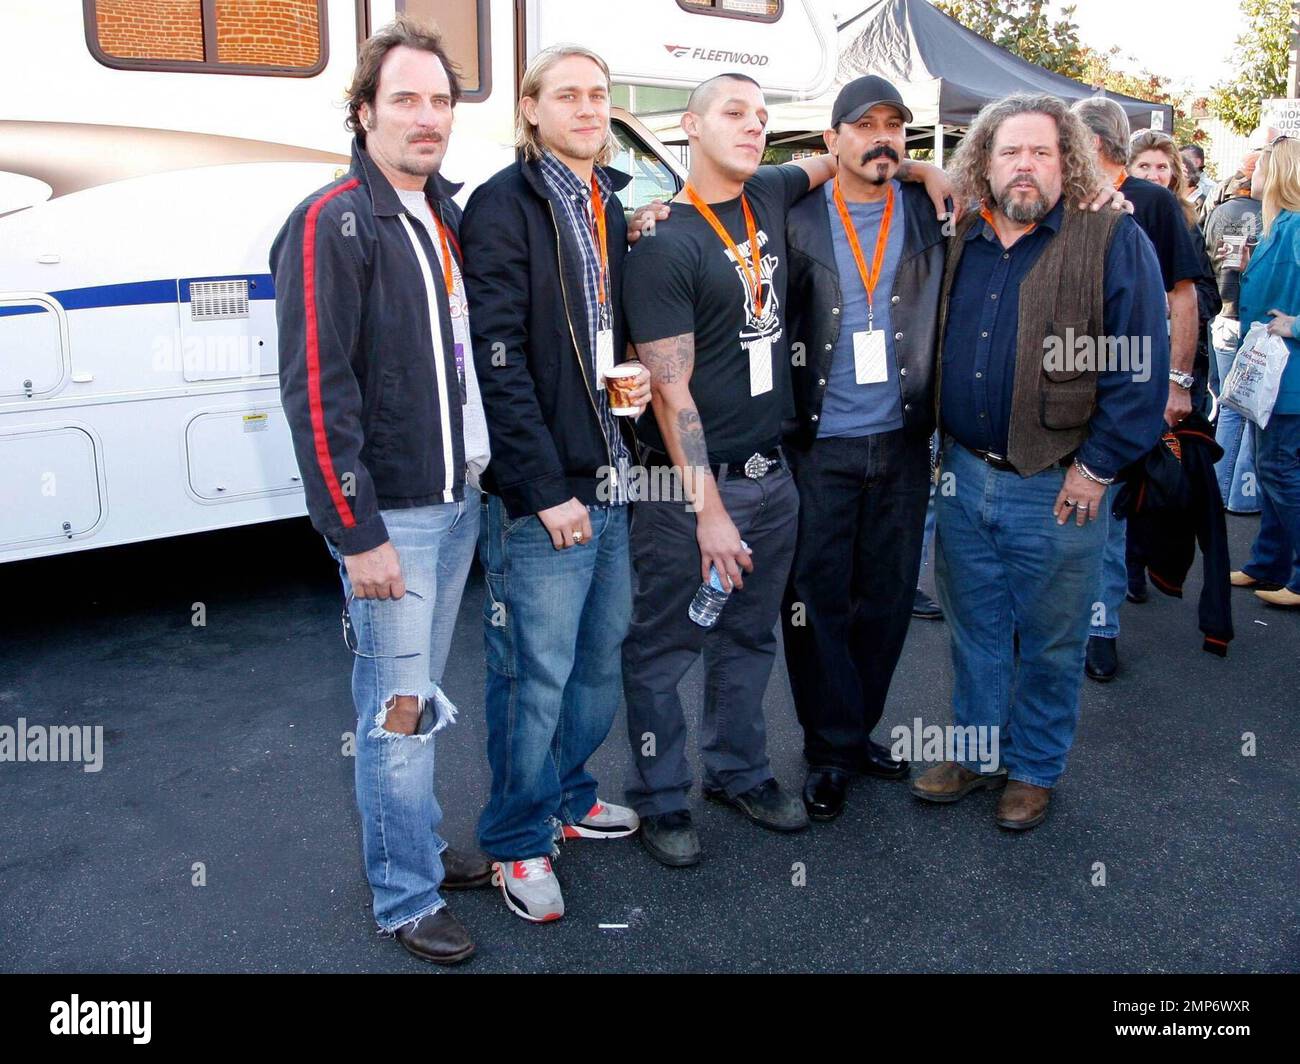 'Sons of Anarchy' cast members Kim Coates, Charlie Hunnam, Theor Rossi, Emilio Rivera and Mark Boone Junior arrive at the 25th Annual Love Ride. The Love Ride is the world's largest one-day motorcycle fundraiser and featured event of California Bike Week. Glendale, CA. 10/26/08. Stock Photo